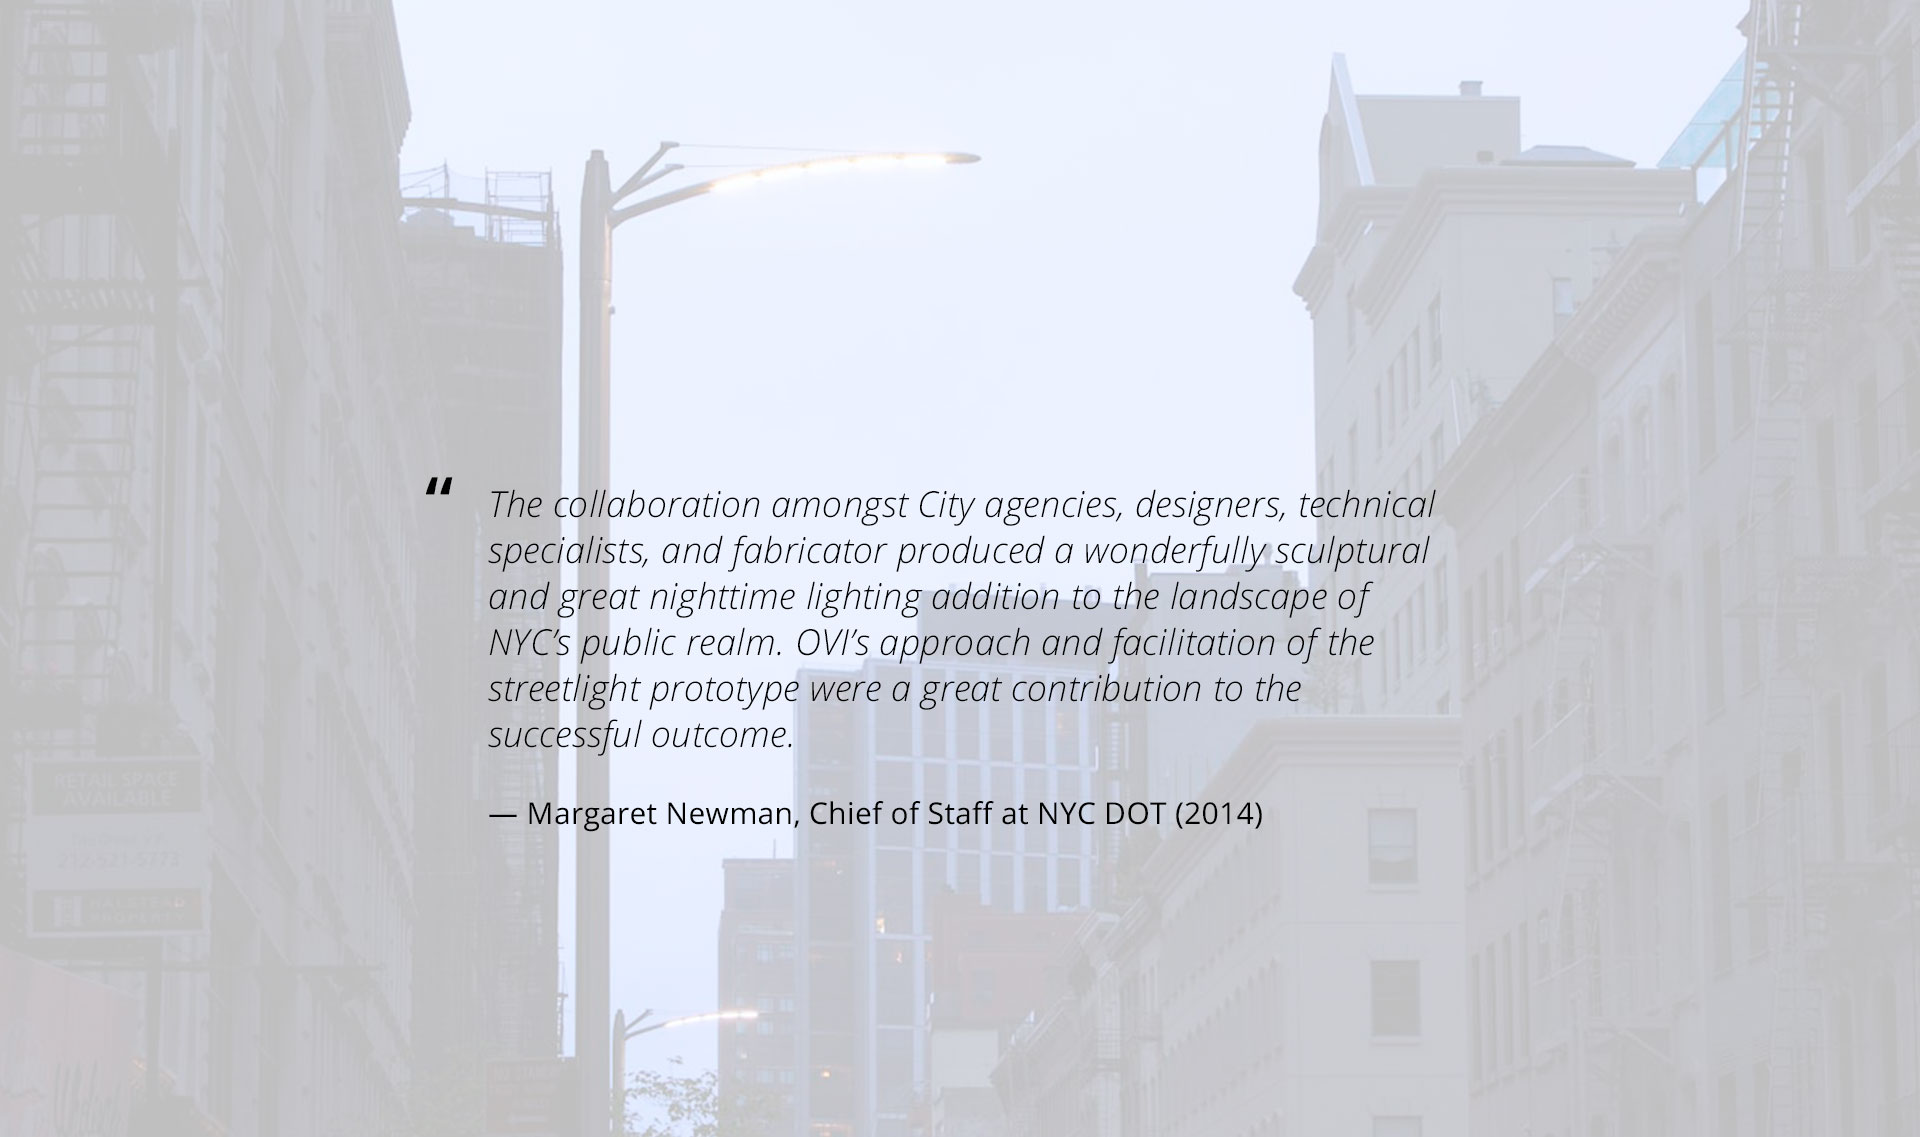 Testimonial about OVI from Margaret Newman, Chief of Staff at NYC DOT